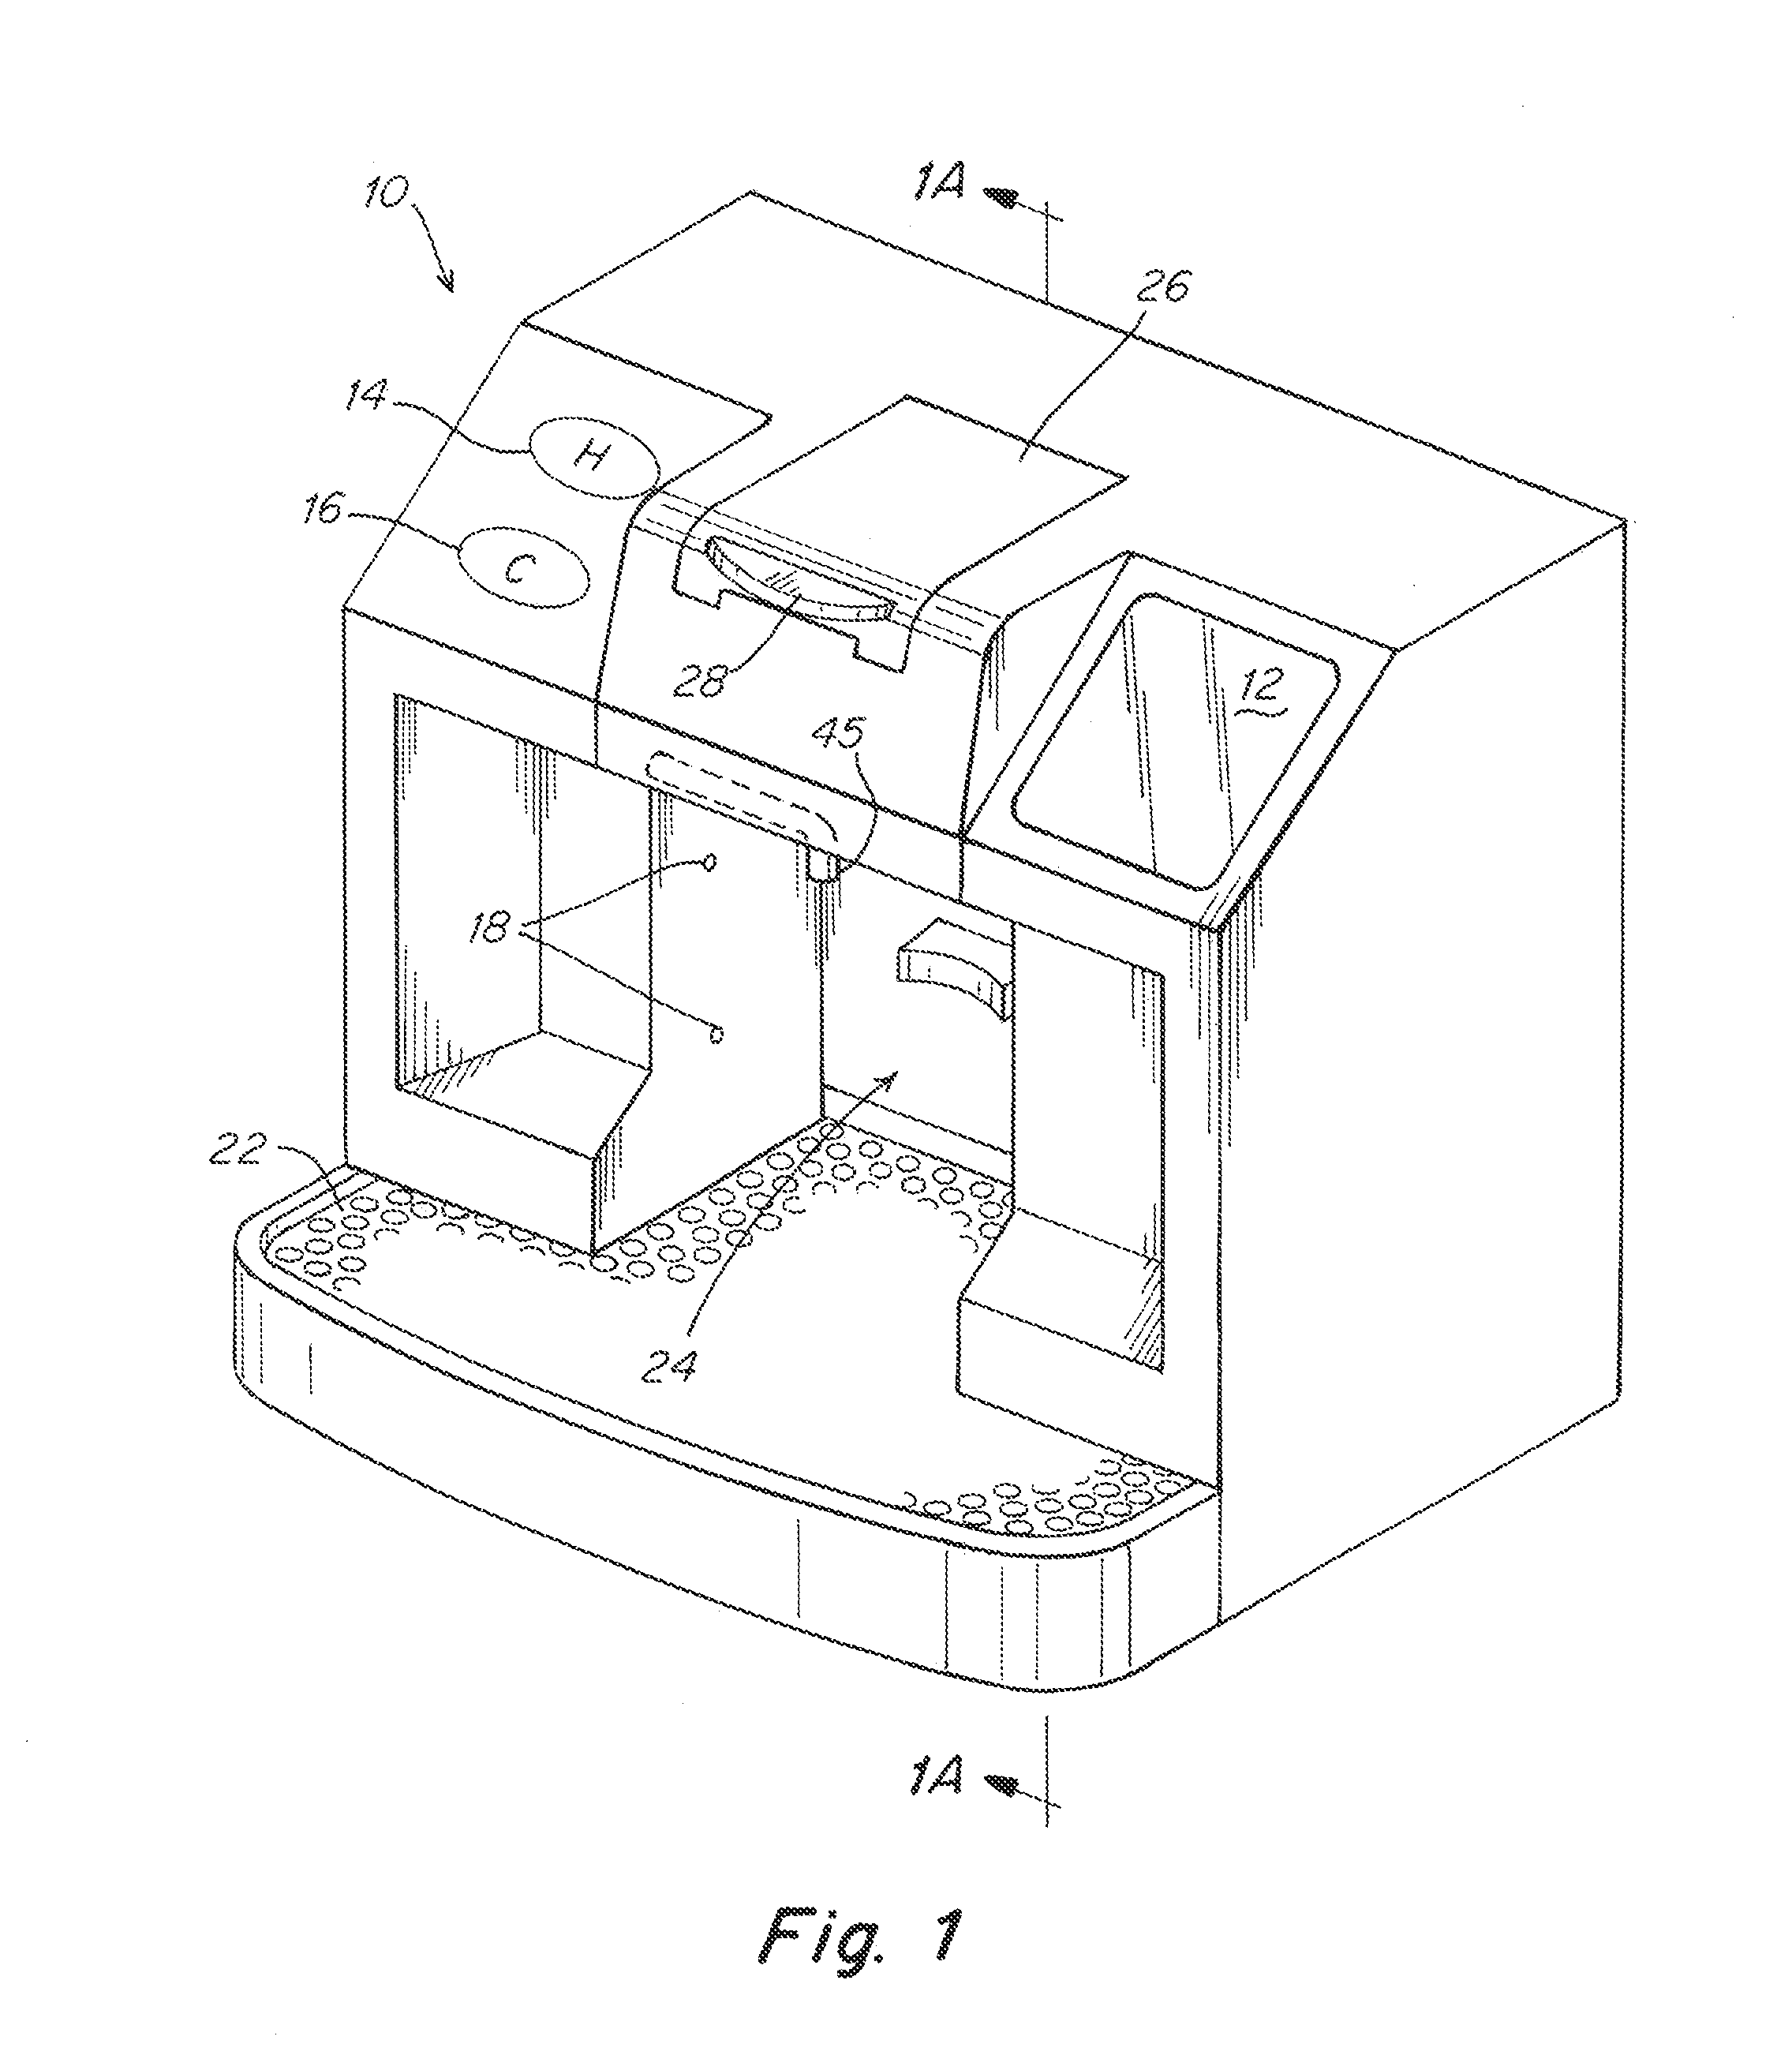 Capsule Based System for Preparing and Dispensing a Beverage